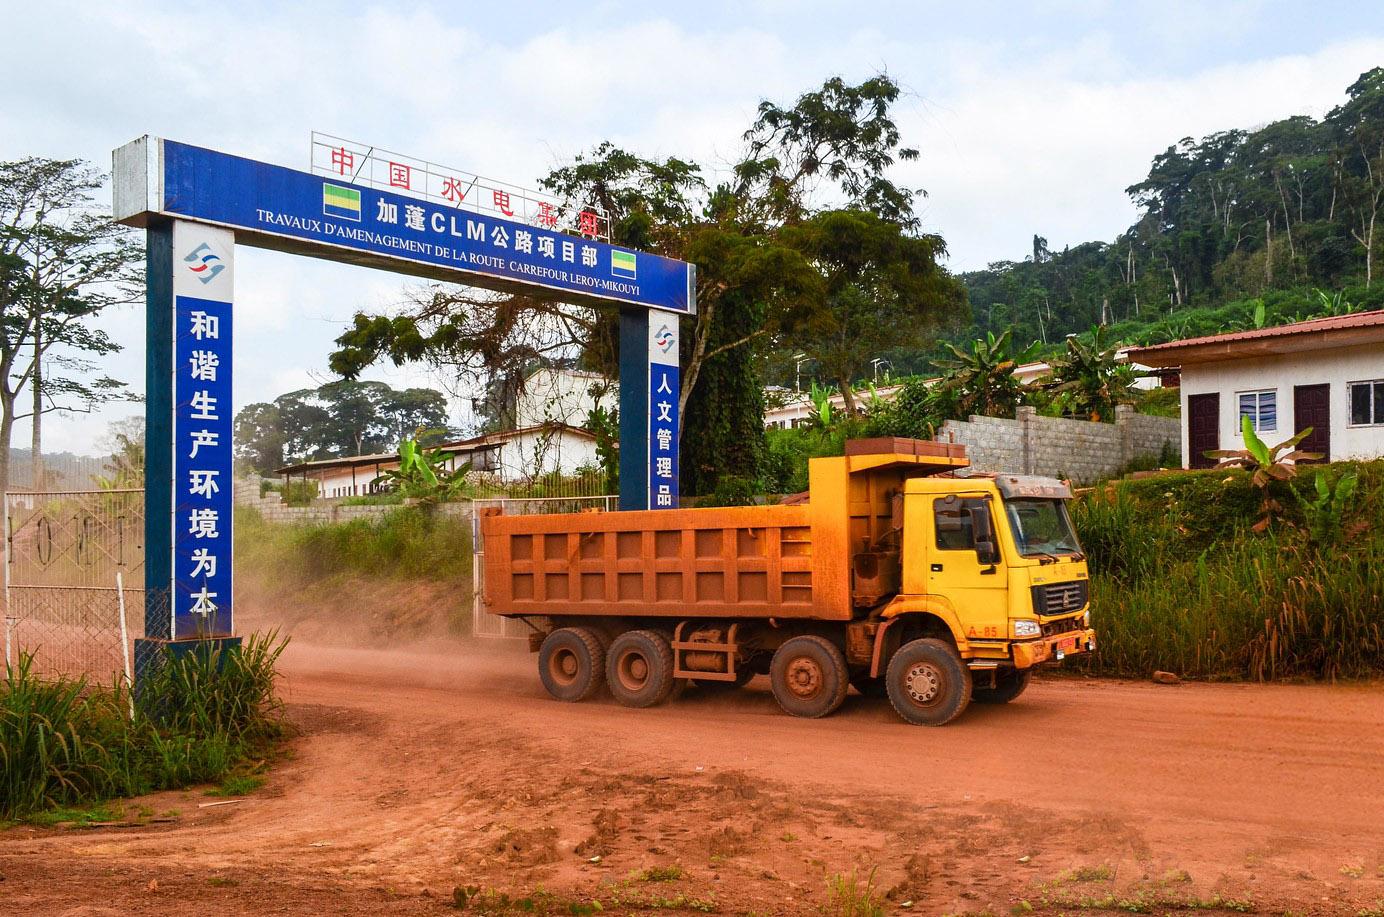 Construction truck in a Chinese-funded project in Gabon